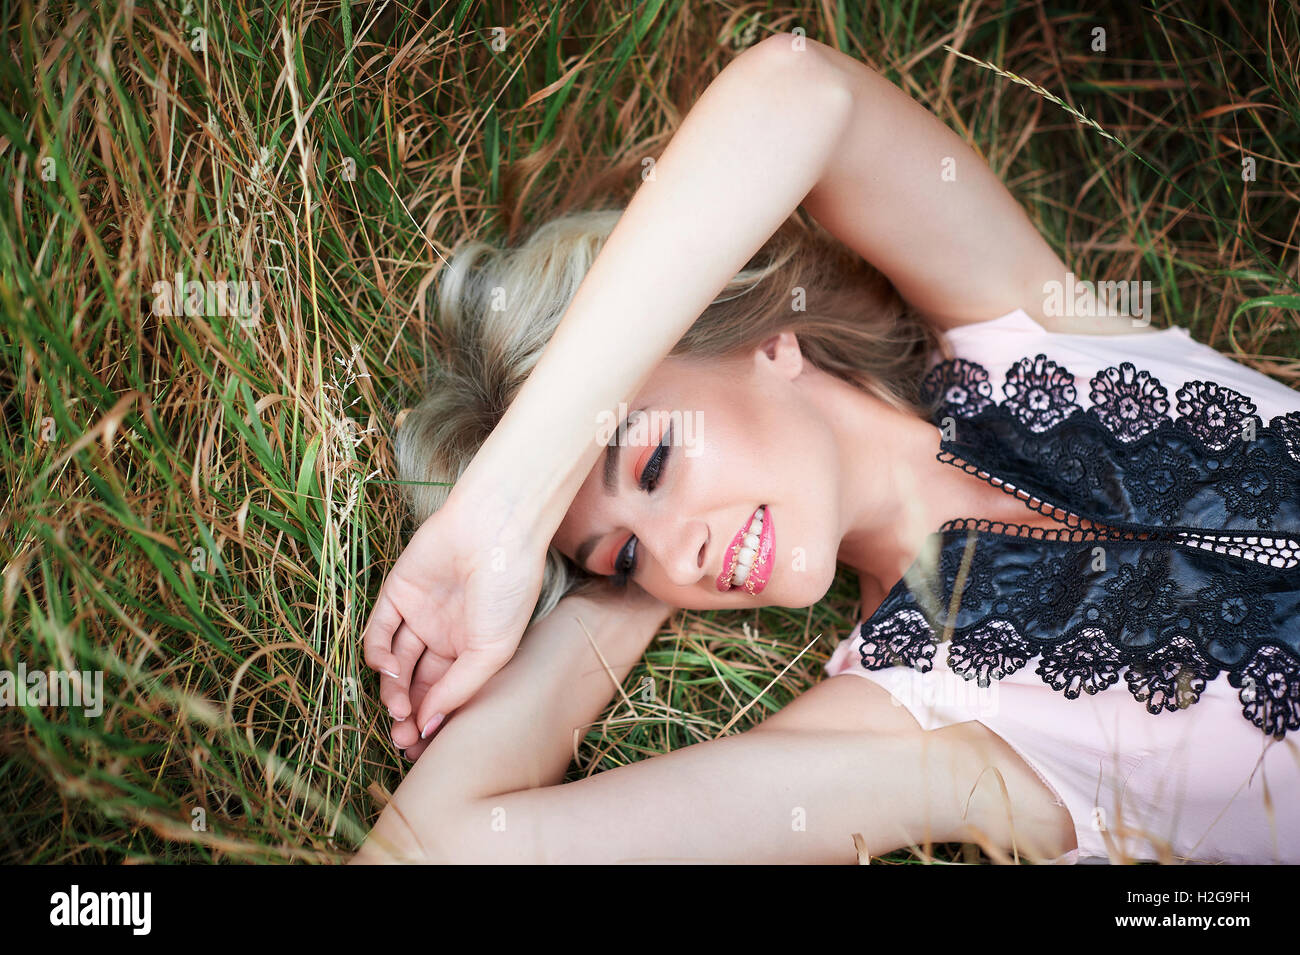 Young happy woman lying on the grass Outdoors Stock Photo